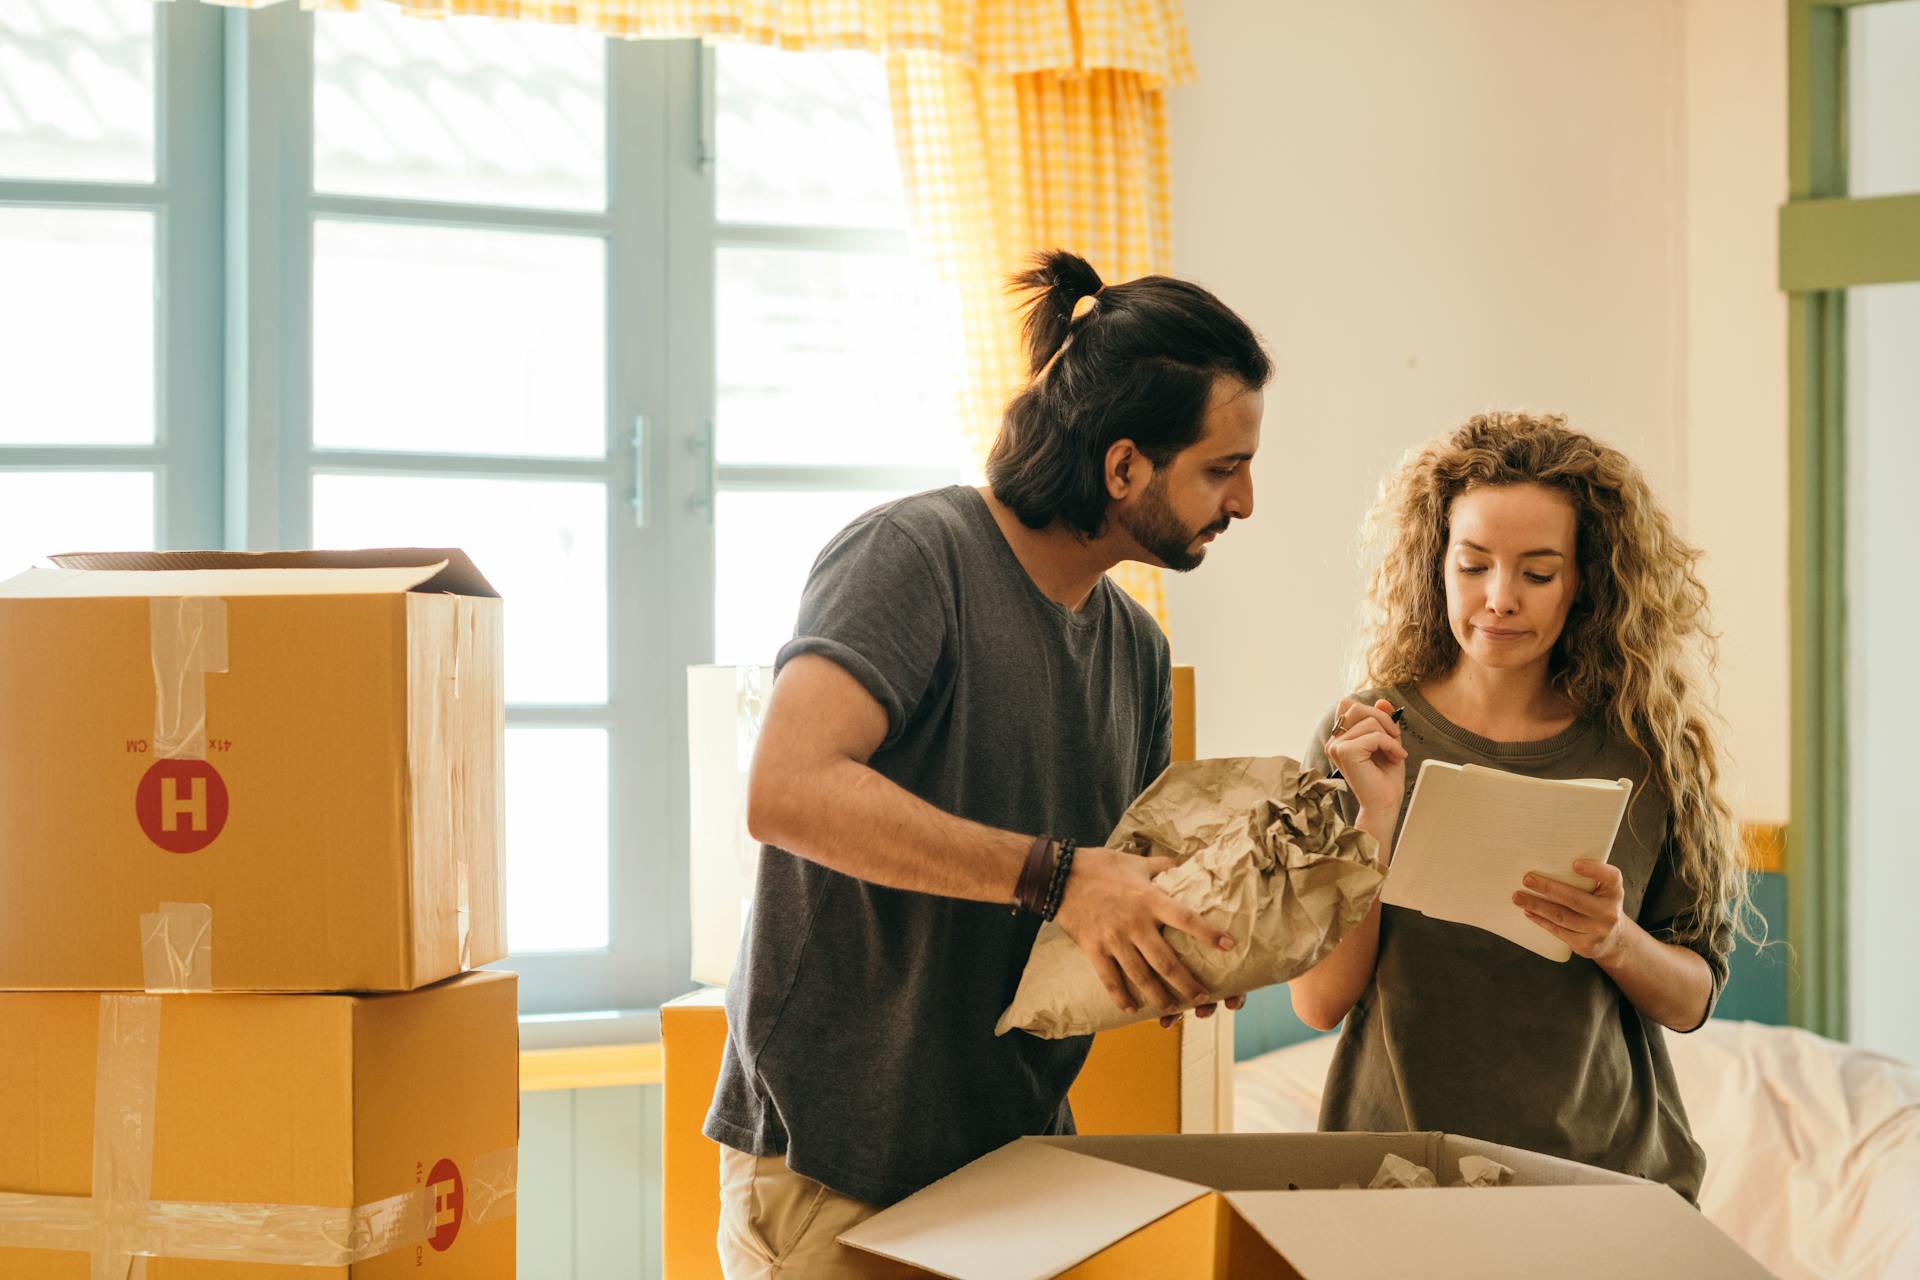 It's fun to move into a new home, but it costs money. You may hire movers to help you move your things, and you'll need packing tools like boxes and tape. You can push yourself, but you'll still have to pay for gas, a rental truck, and maybe even storage fees if you need to keep your things for a while. Make sure you plan for these costs in your moving budget, as they can add up quickly. :: Pexels